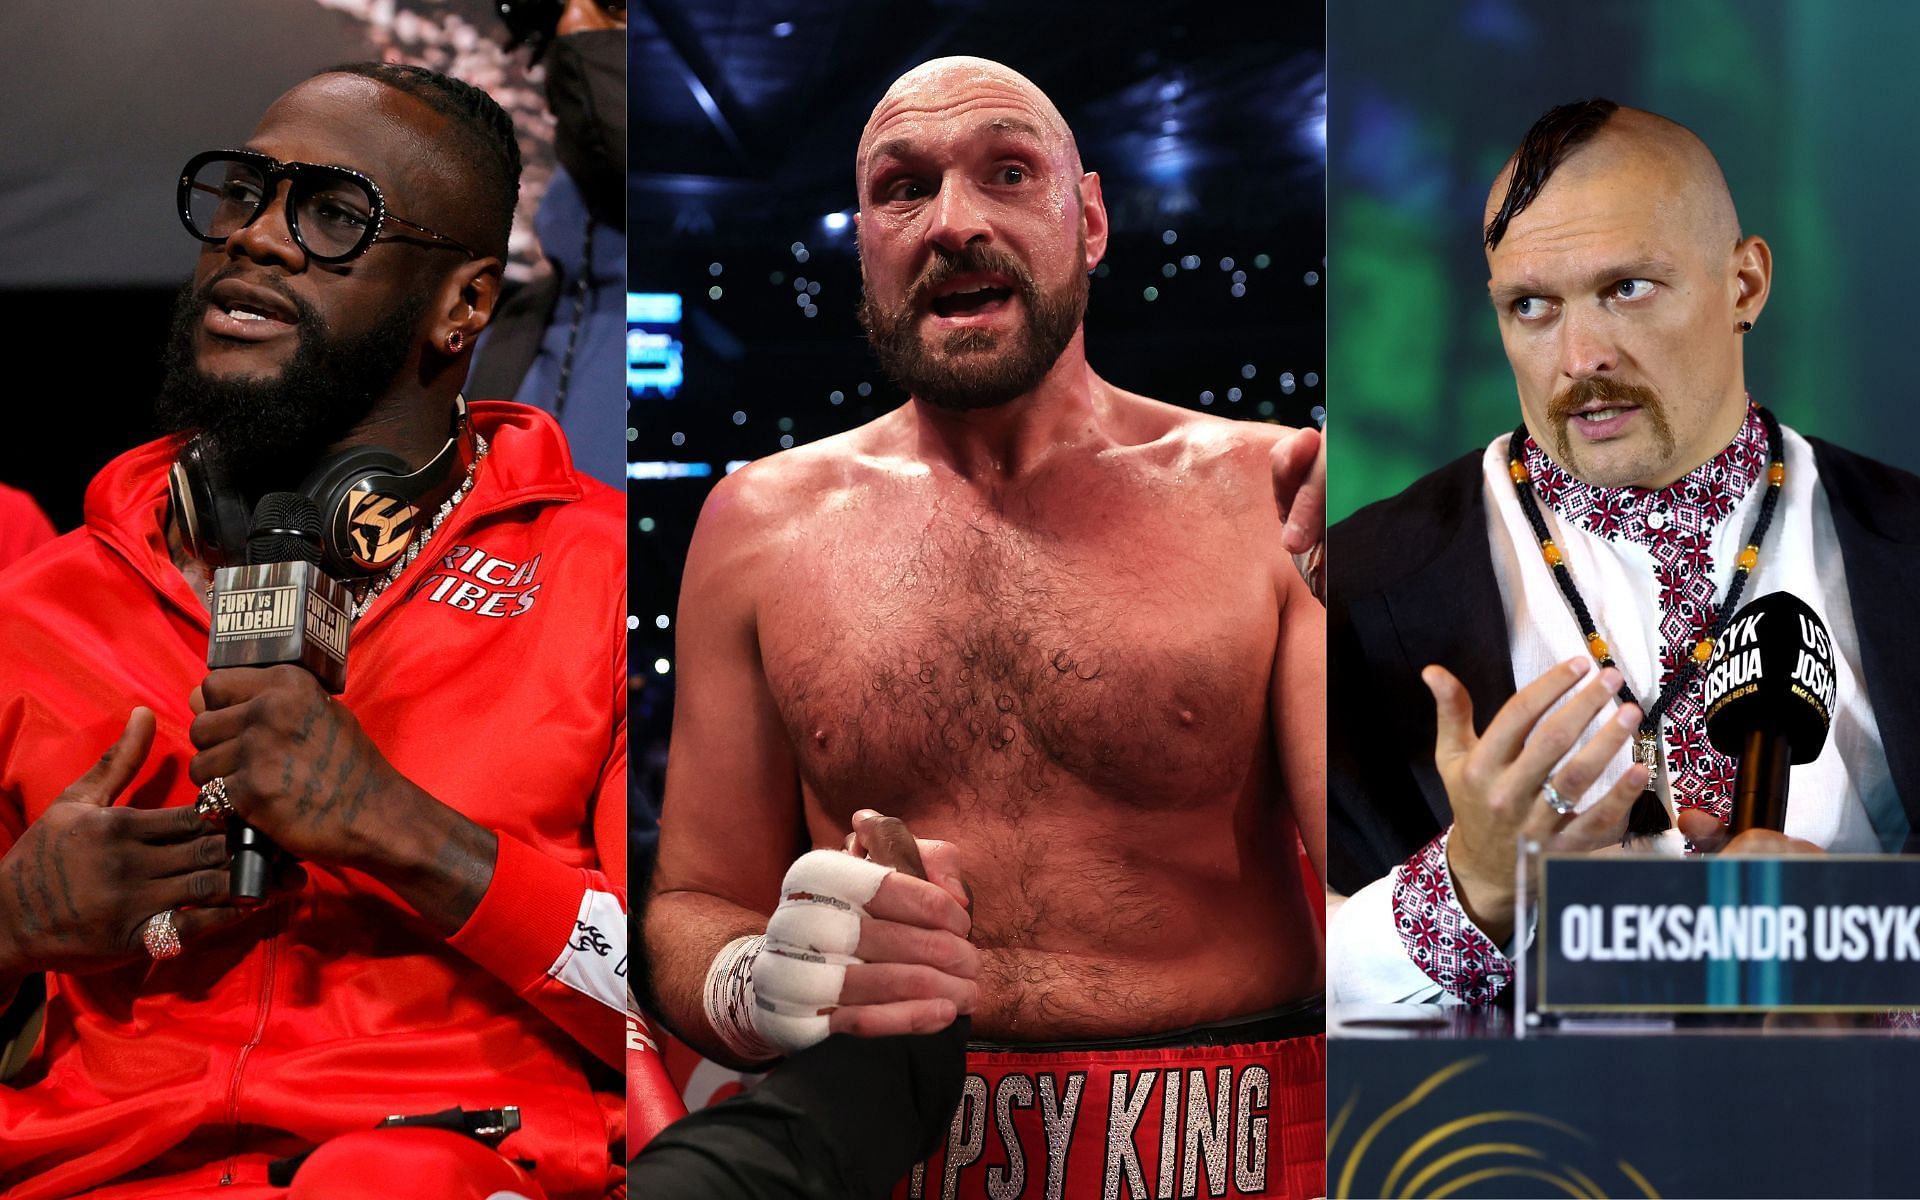 Deontay Wilder (left), Tyson Fury (center), and Oleksandr Usyk (right) (Image credits Getty Images)